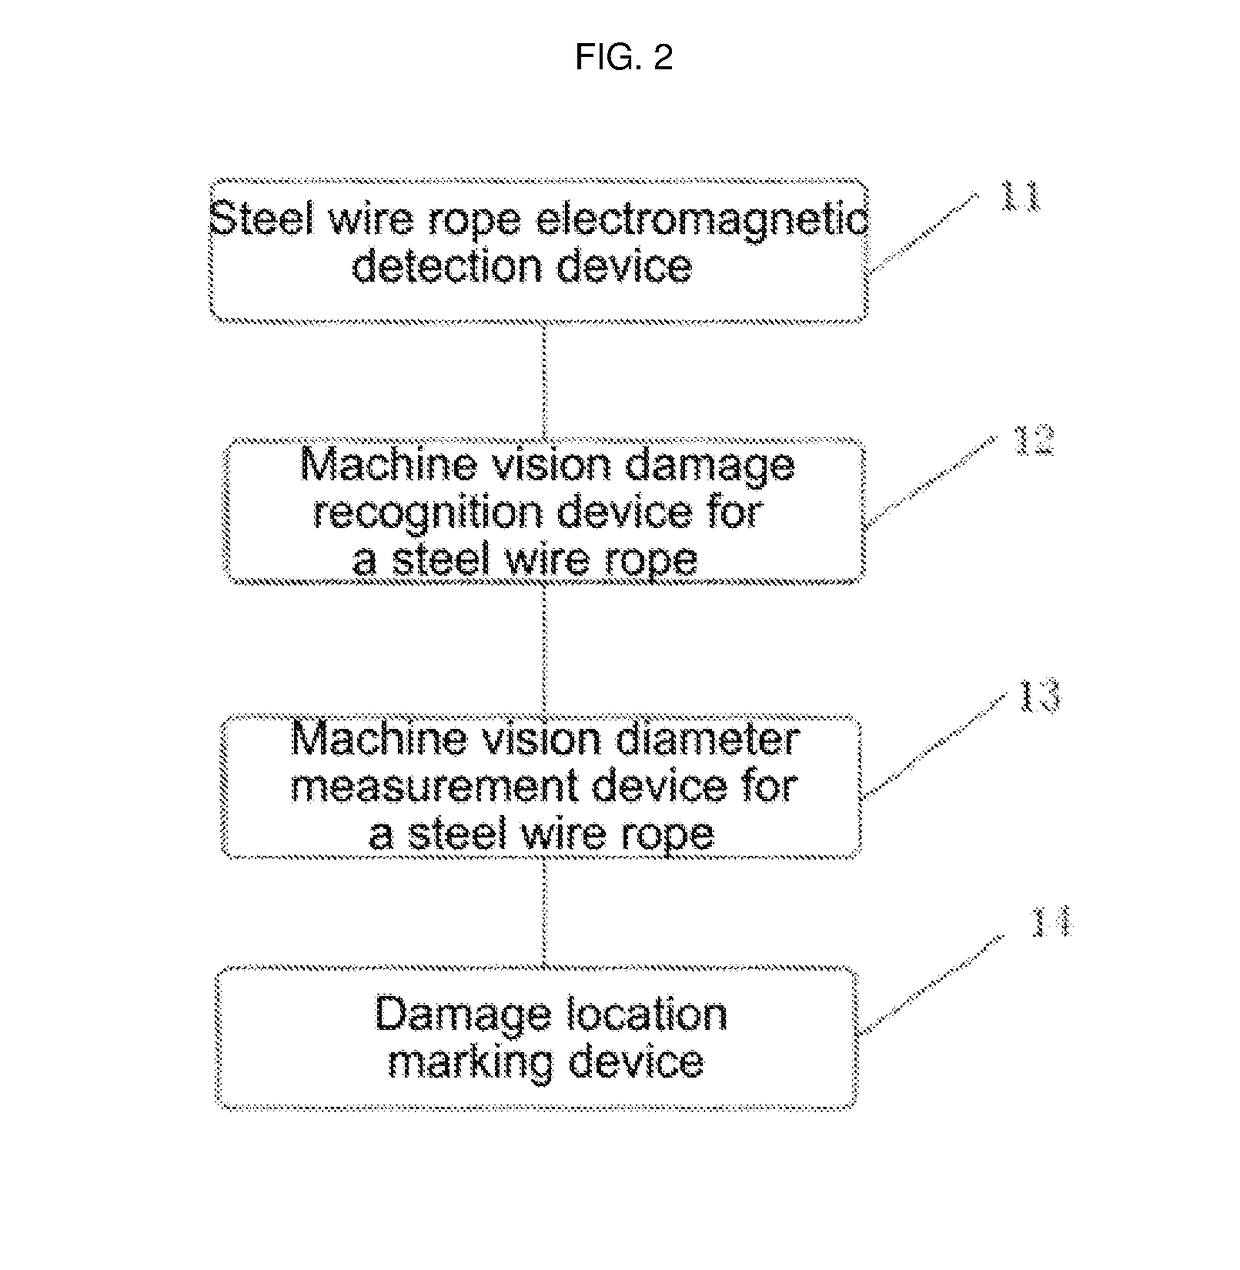 Holographic detection system for steel wire rope